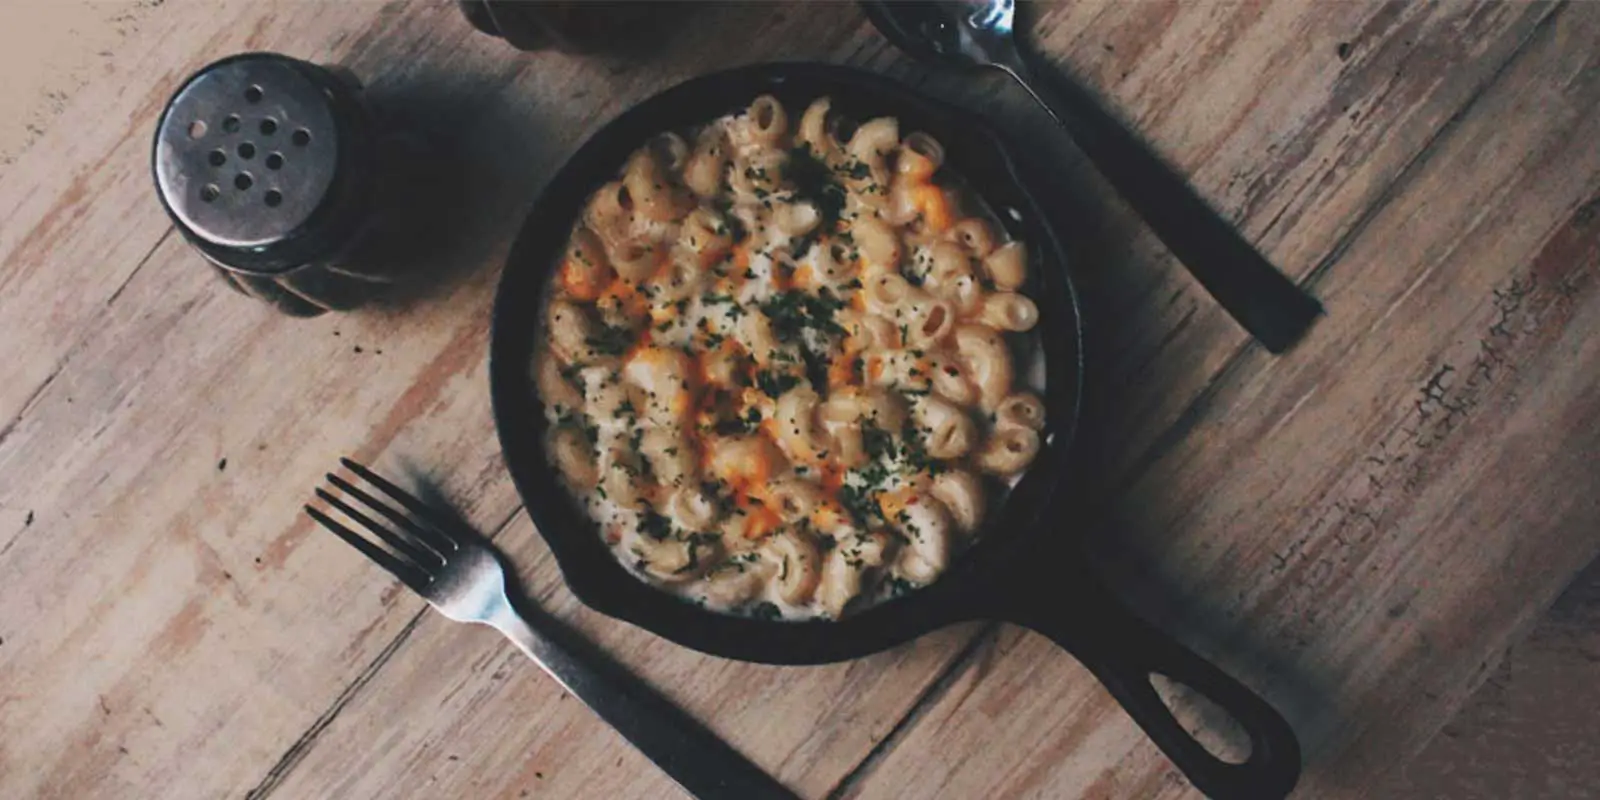 How to Season a Cast Iron Skillet: Everything you Need to Know